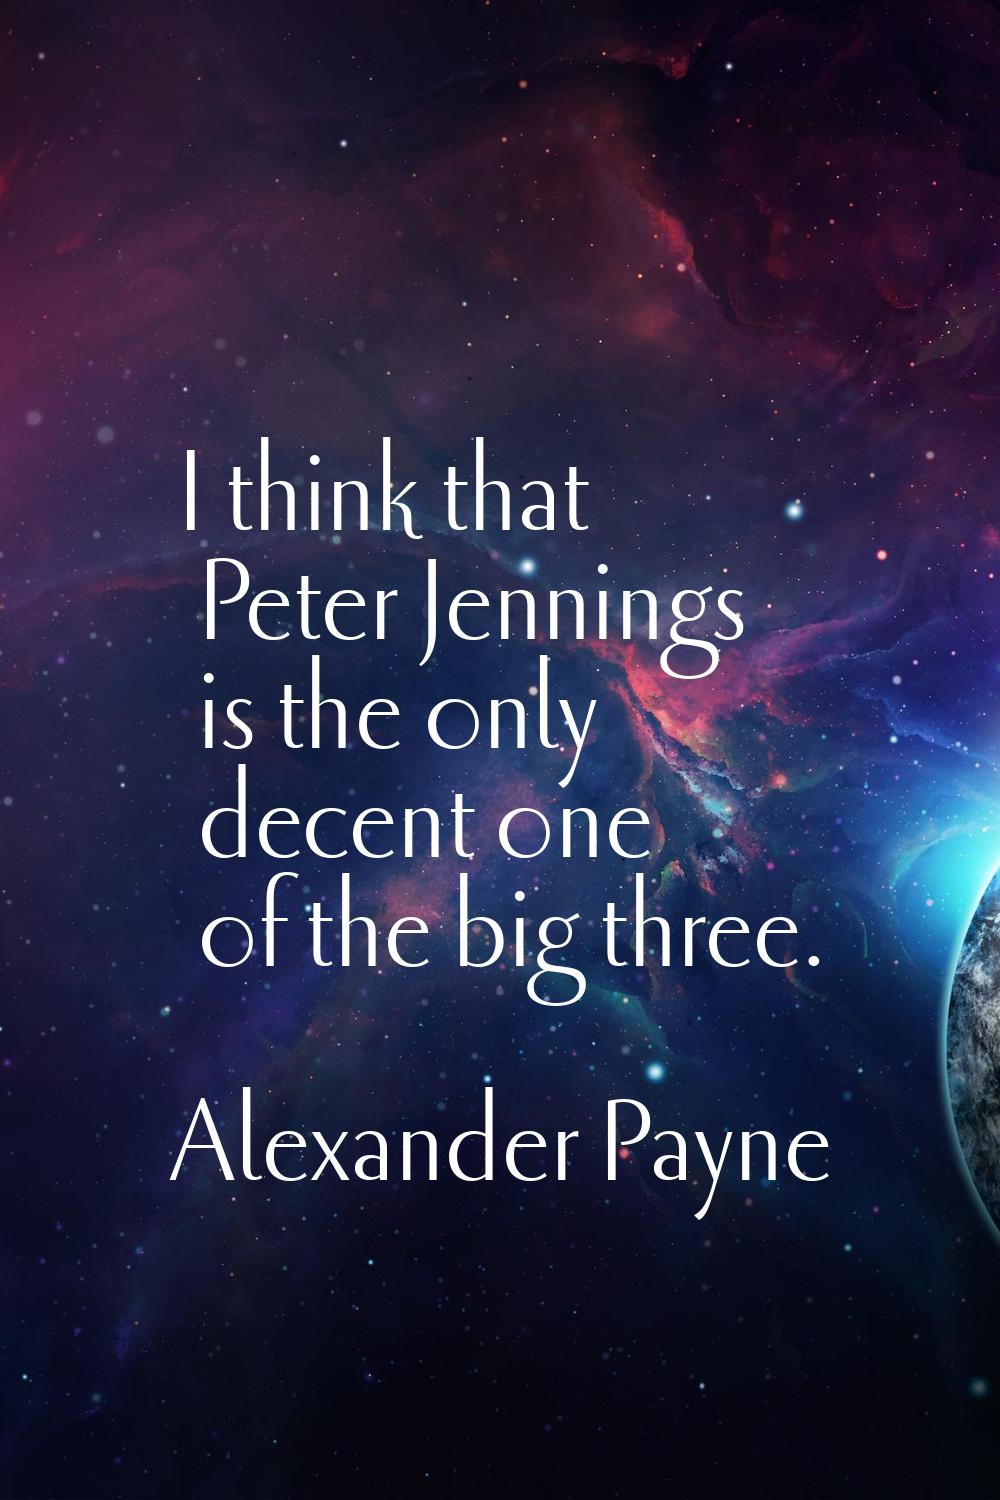 I think that Peter Jennings is the only decent one of the big three.